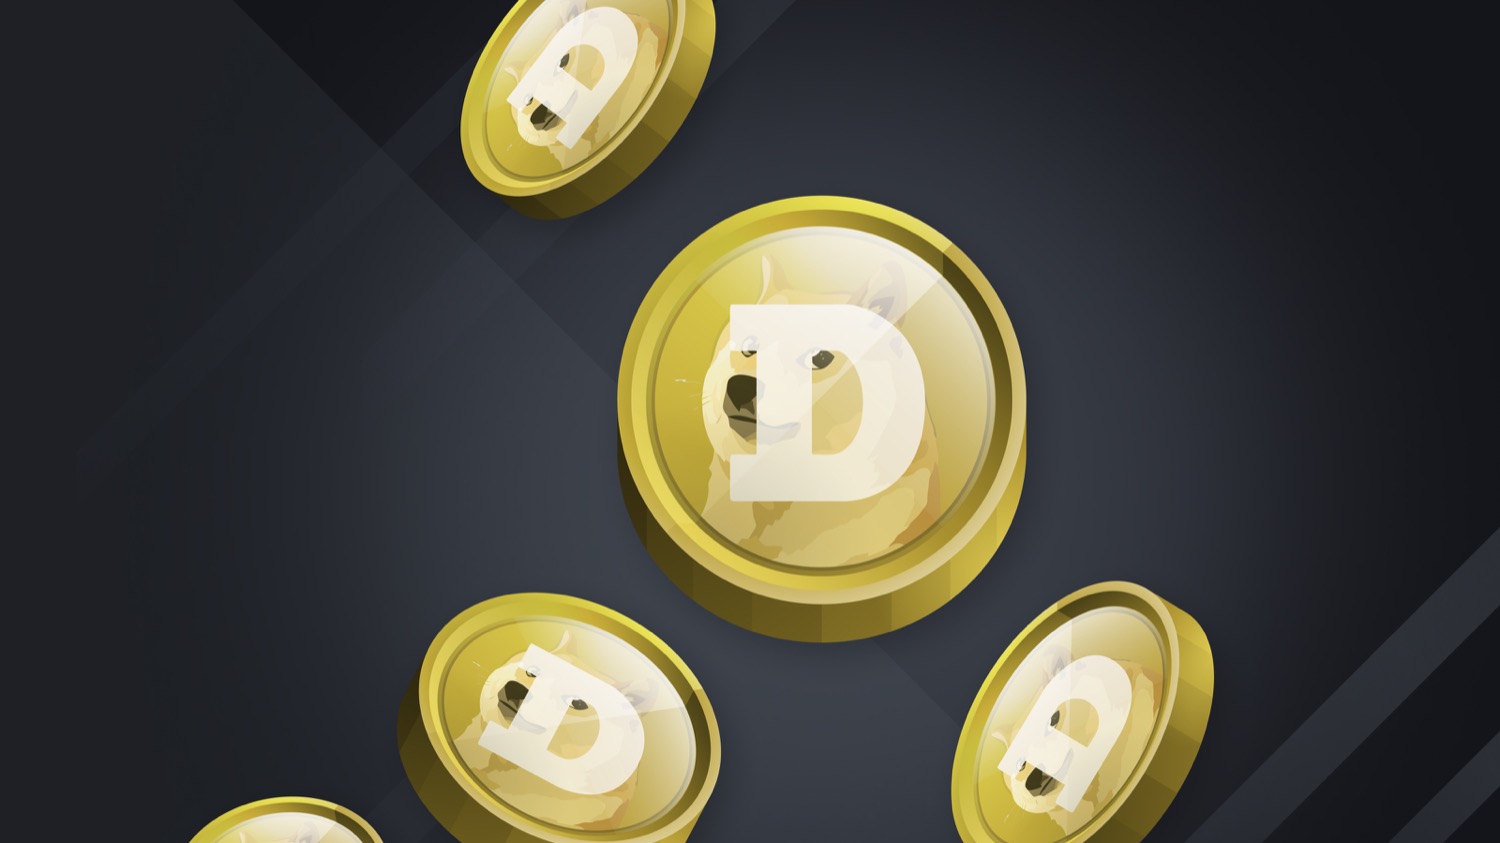 All About Dogecoin (DOGE) | Binance.US Blog